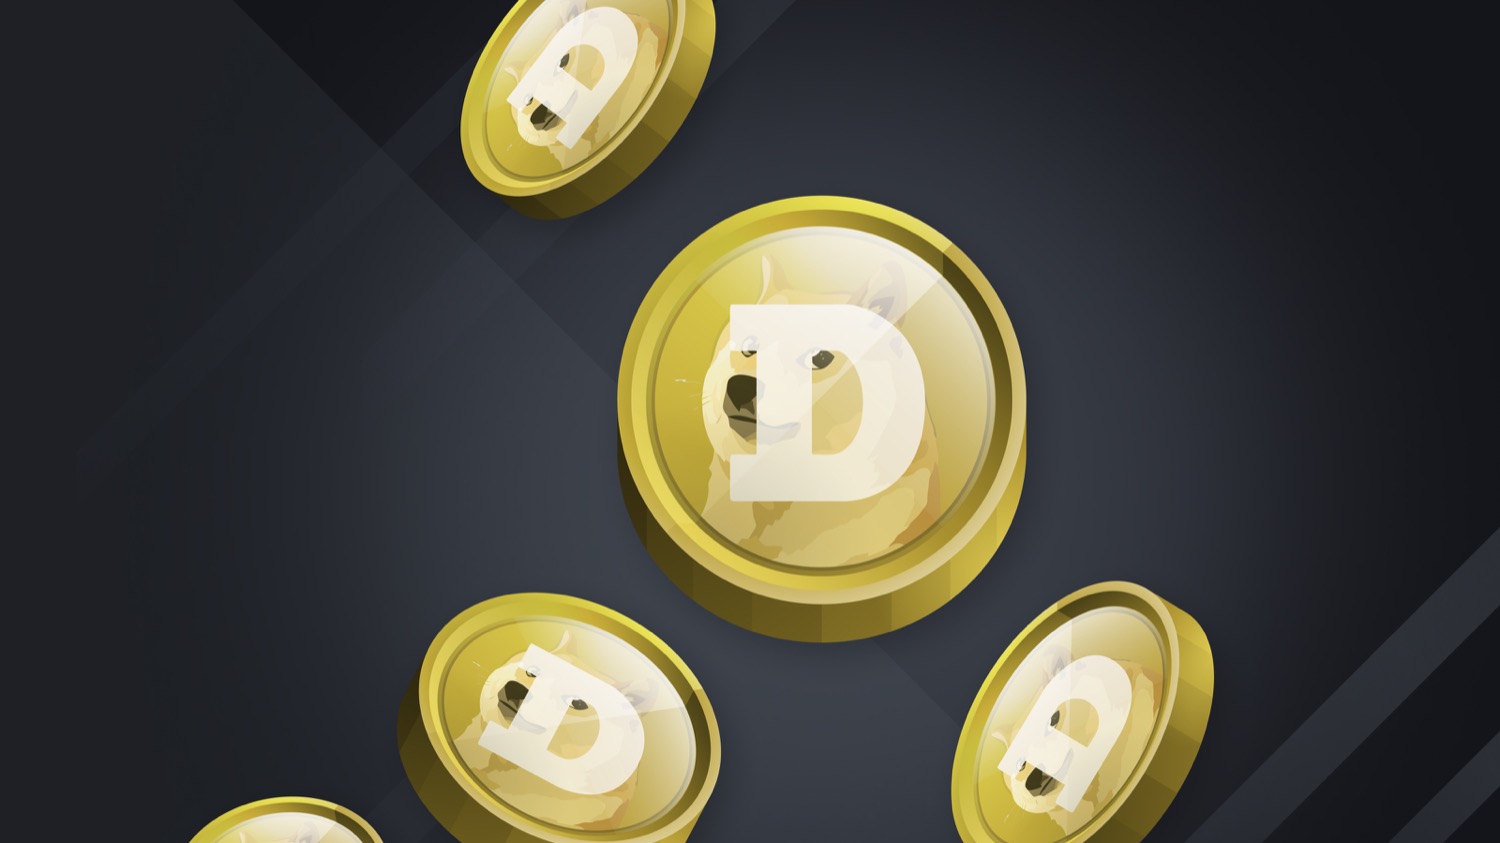 All About Dogecoin (DOGE) | Binance.US Blog